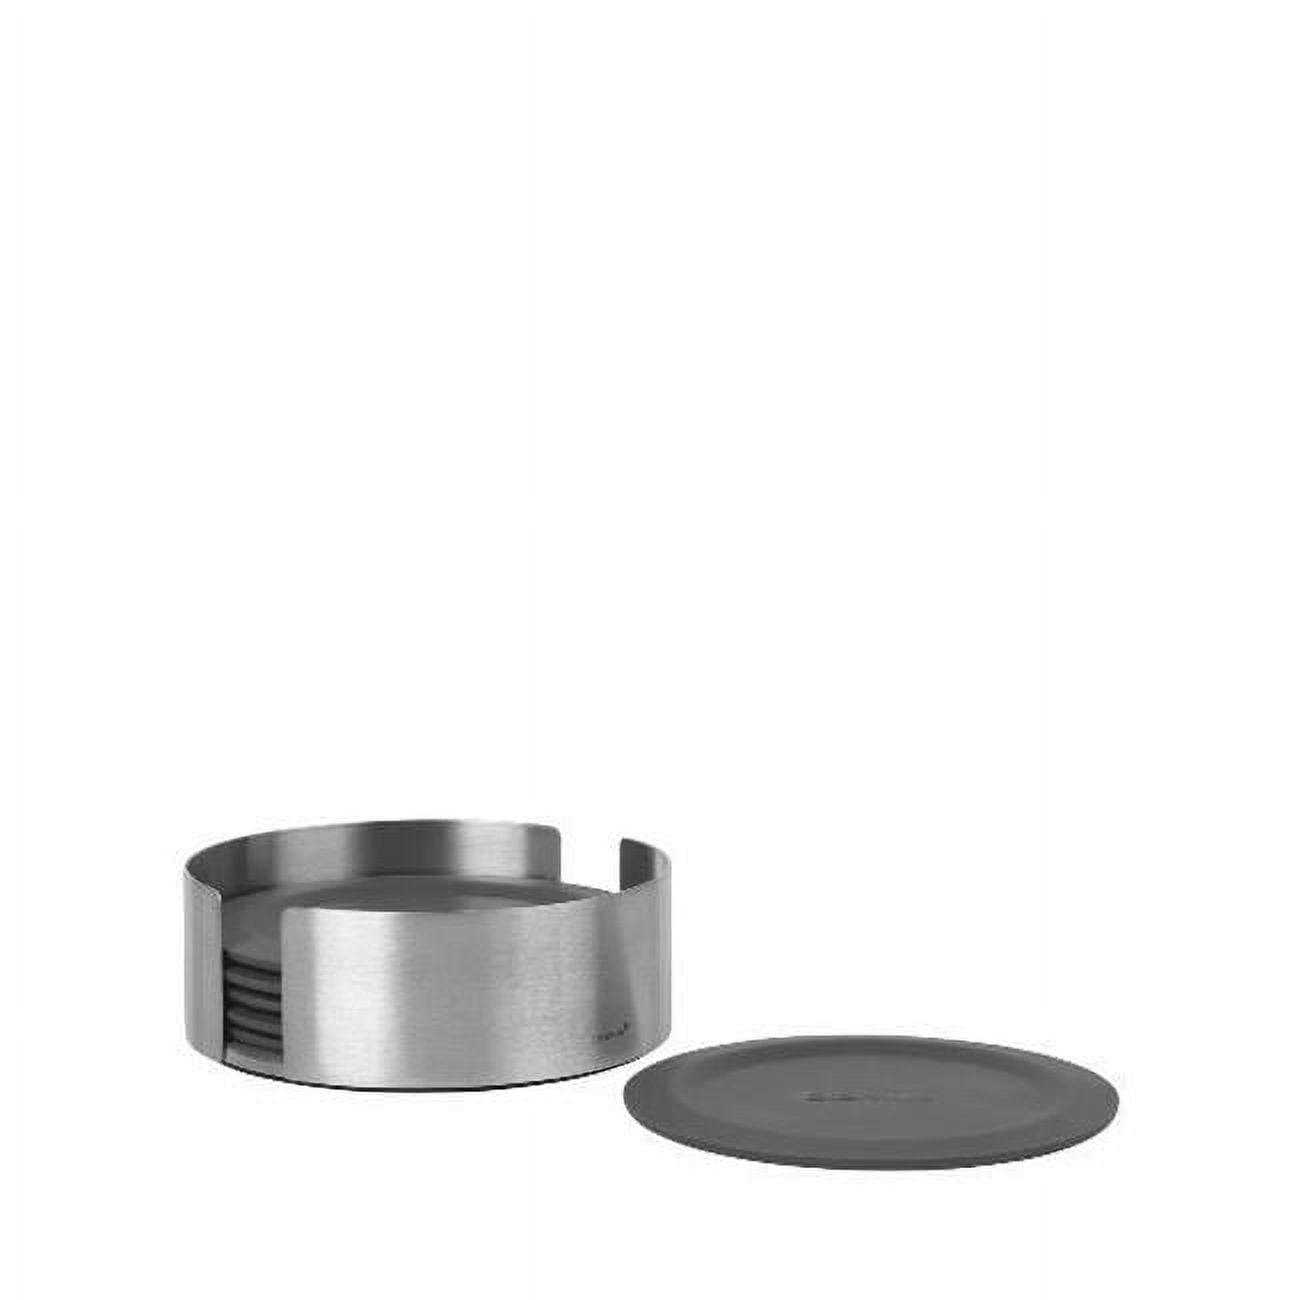 Circular Stainless Steel & Silicone Coaster Set, Magnet